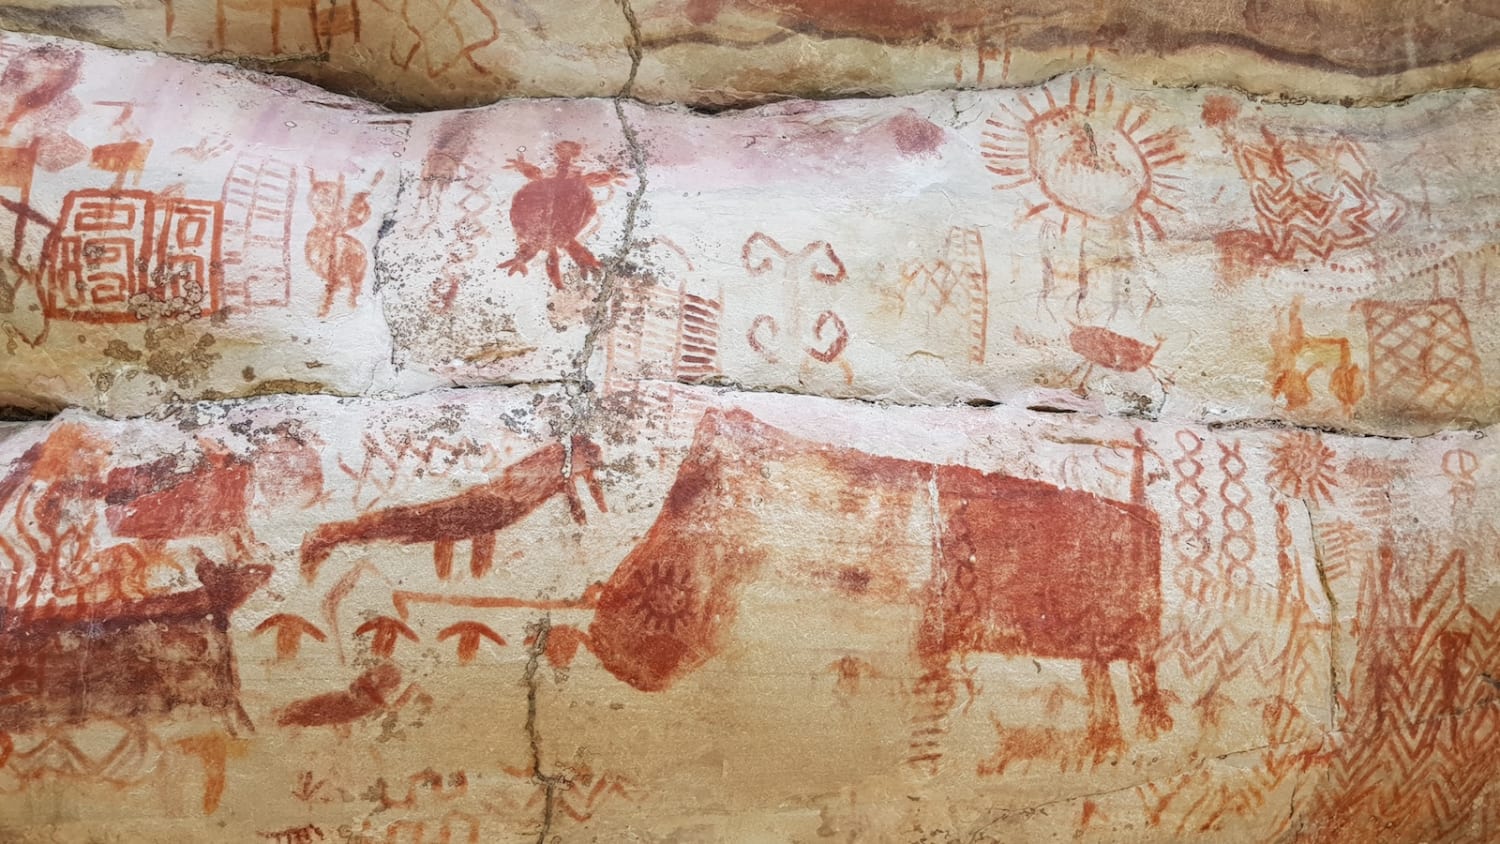 The Sistine Chapel of the Ancients: Archaeologists Discover 8 Miles of Art Painted on Rock Walls in the Amazon